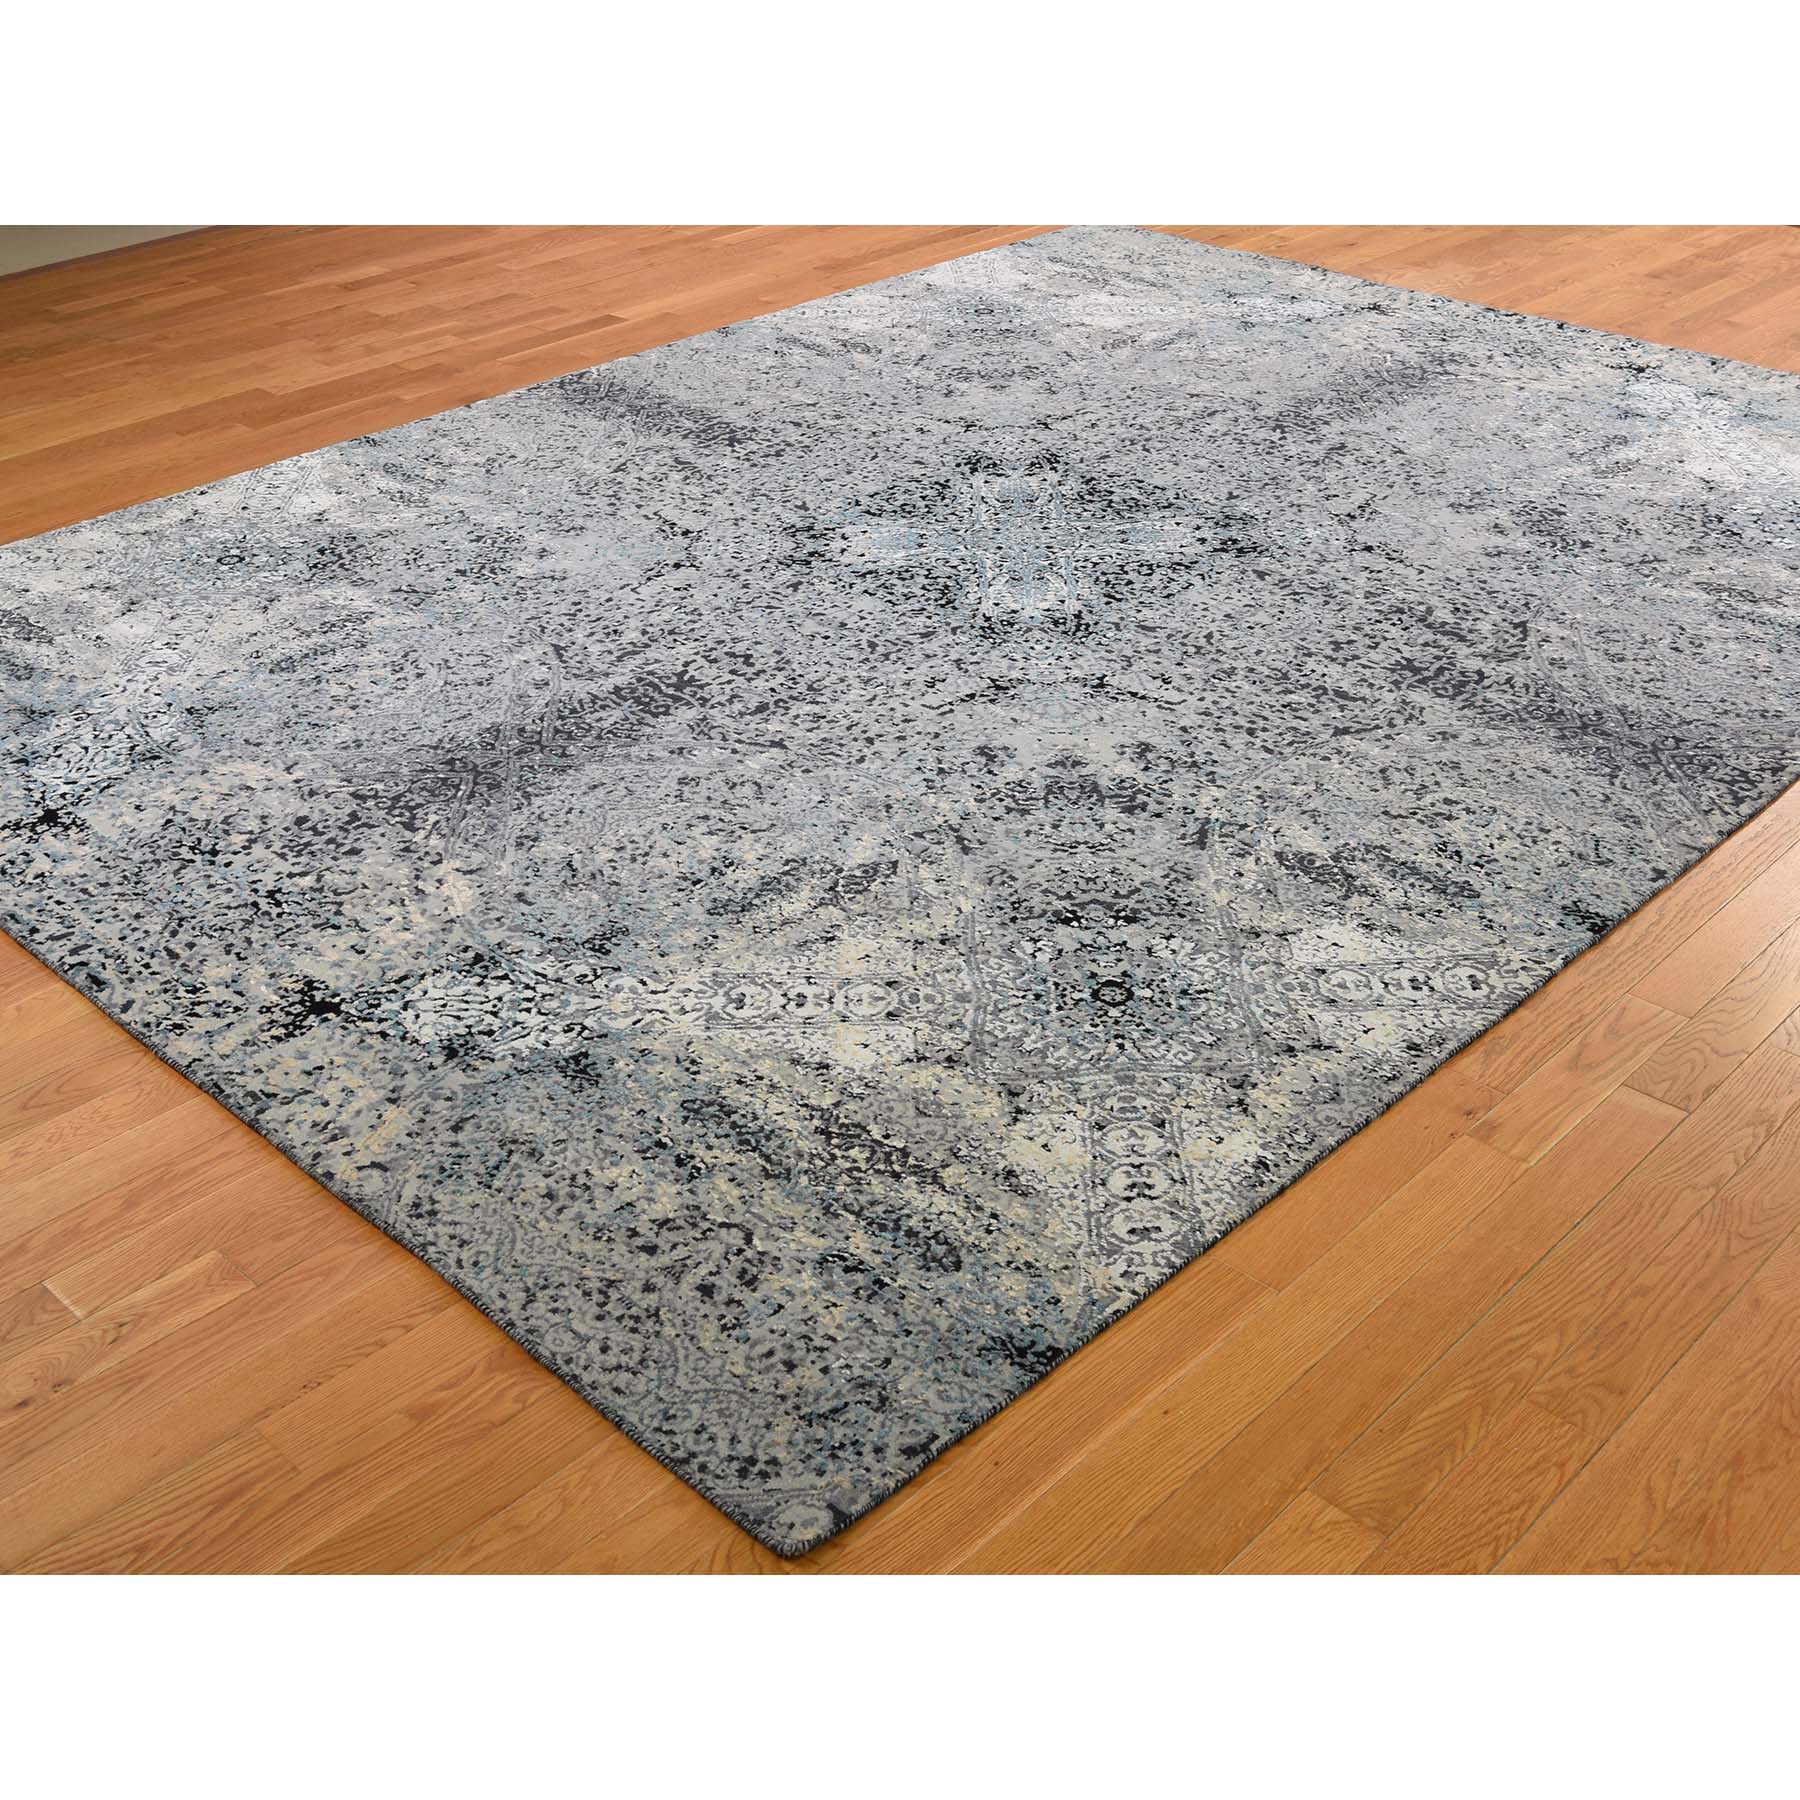 9-1 x12-2  Gray Wool And Silk Abstract Design Hand-Knotted Oriental Rug 